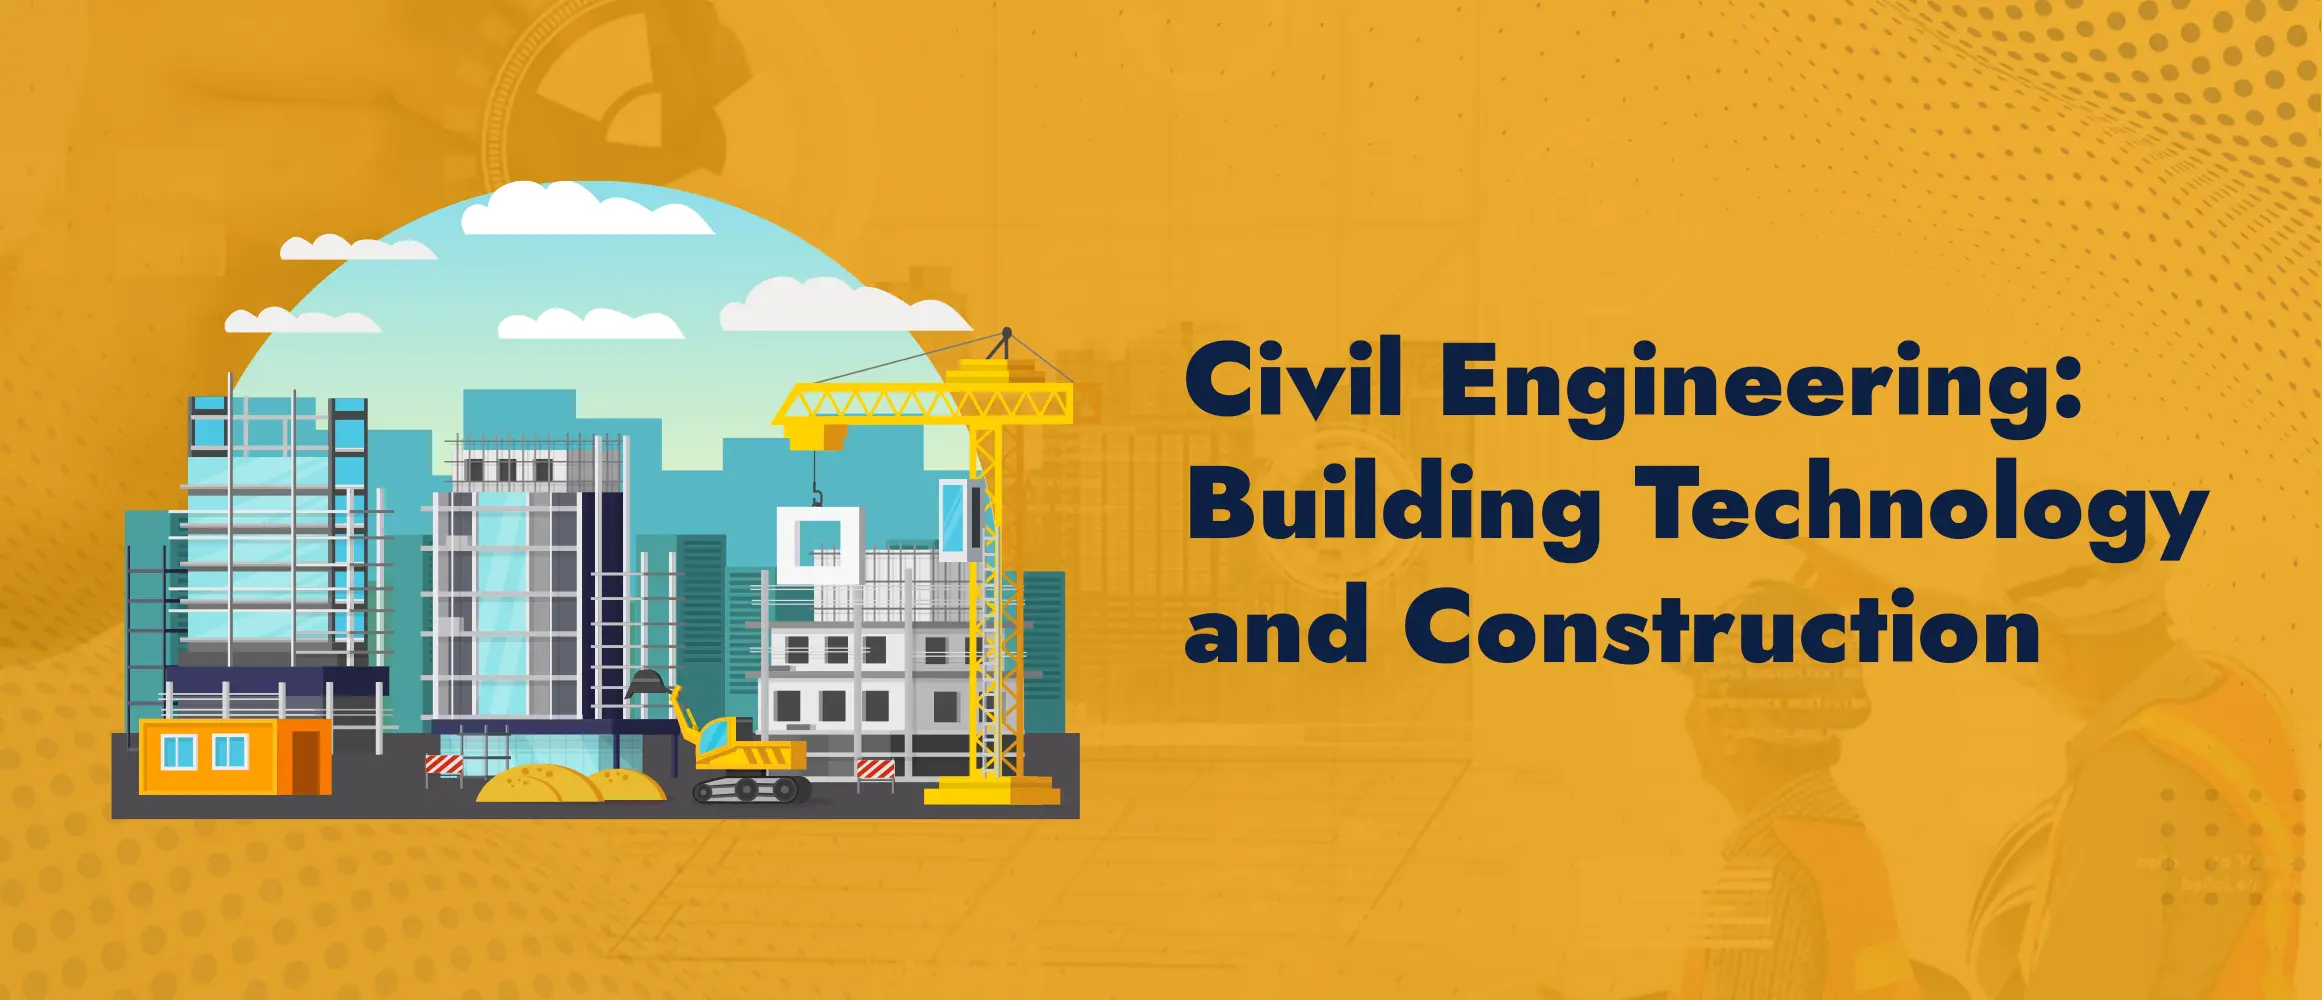 Building Technology And Construction Management